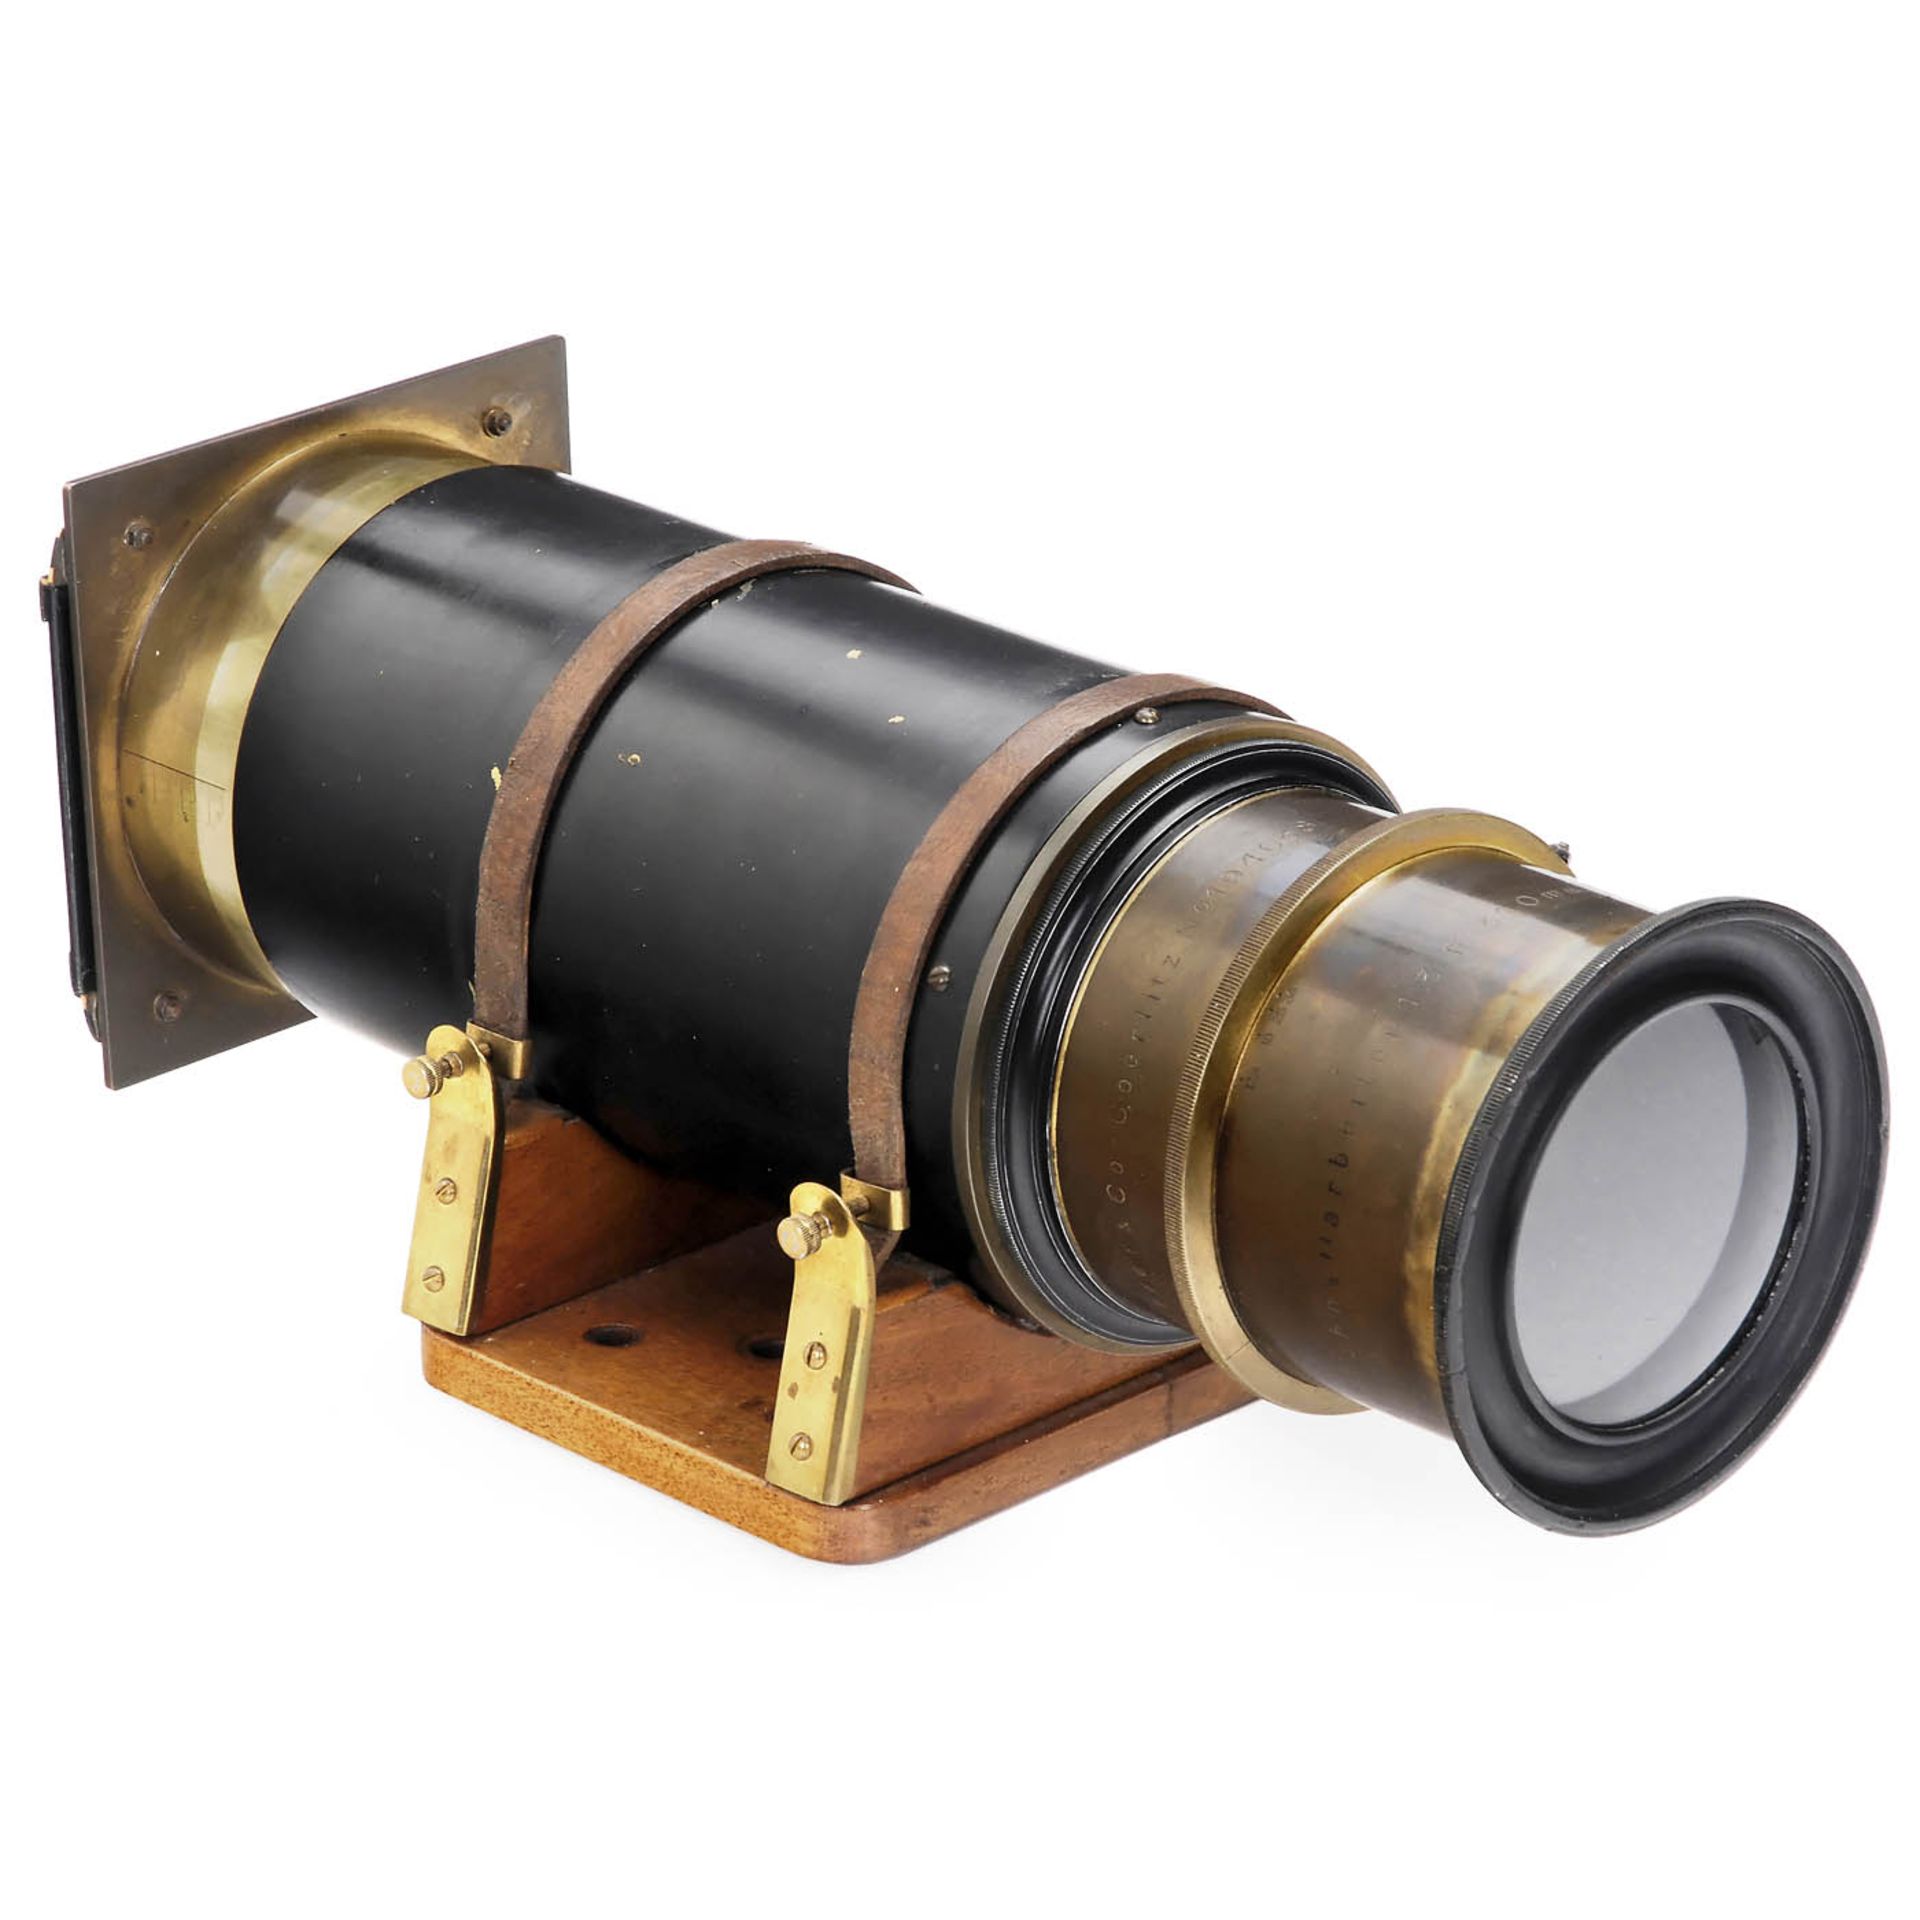 Long Distance Camera with "Meyer Atelier-Schnell­arbeiter 3/310 mm", c. 1920